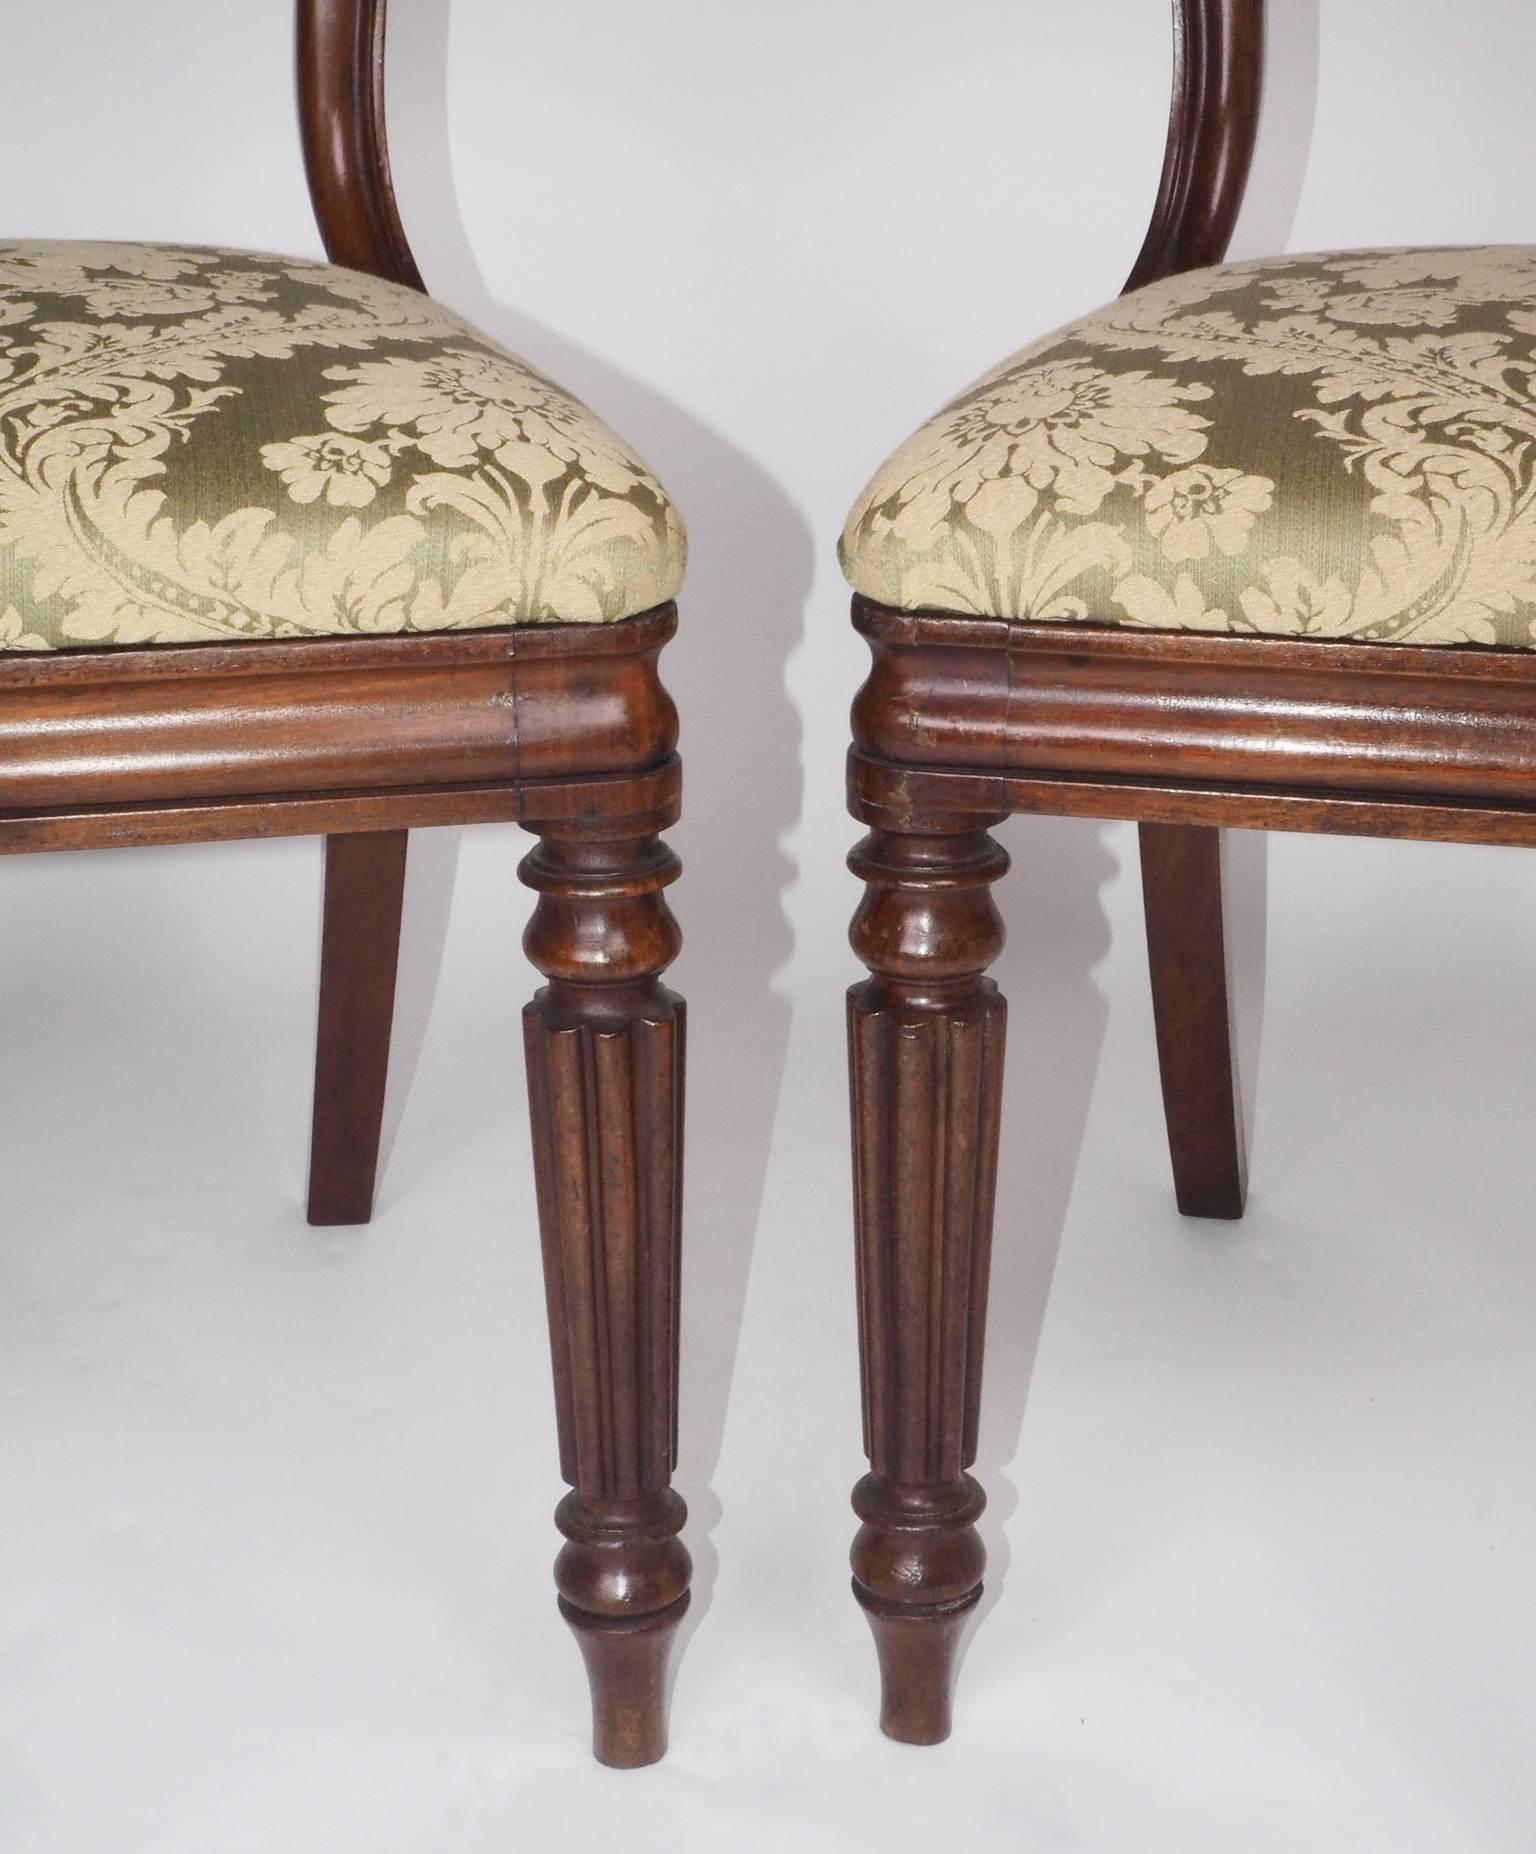 Pair of George IV period mahogany dining chairs with removable pads in the manner
of Gillows of Lancaster and London. The mahogany on the rails is applied to birch. See 
